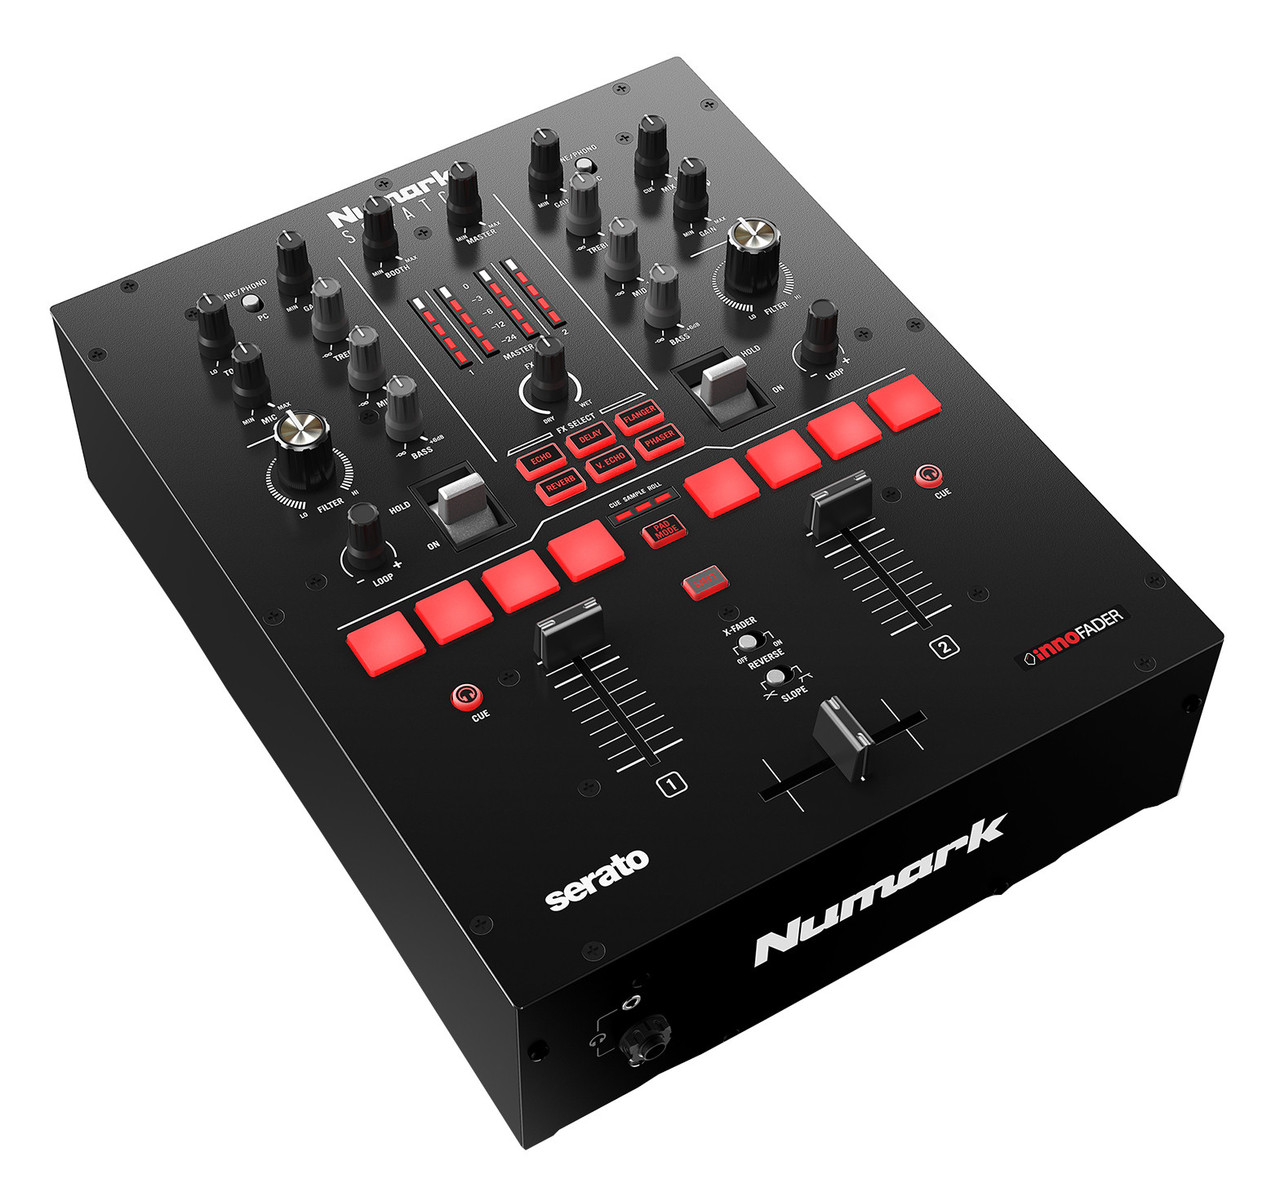 numark turntables and mixer